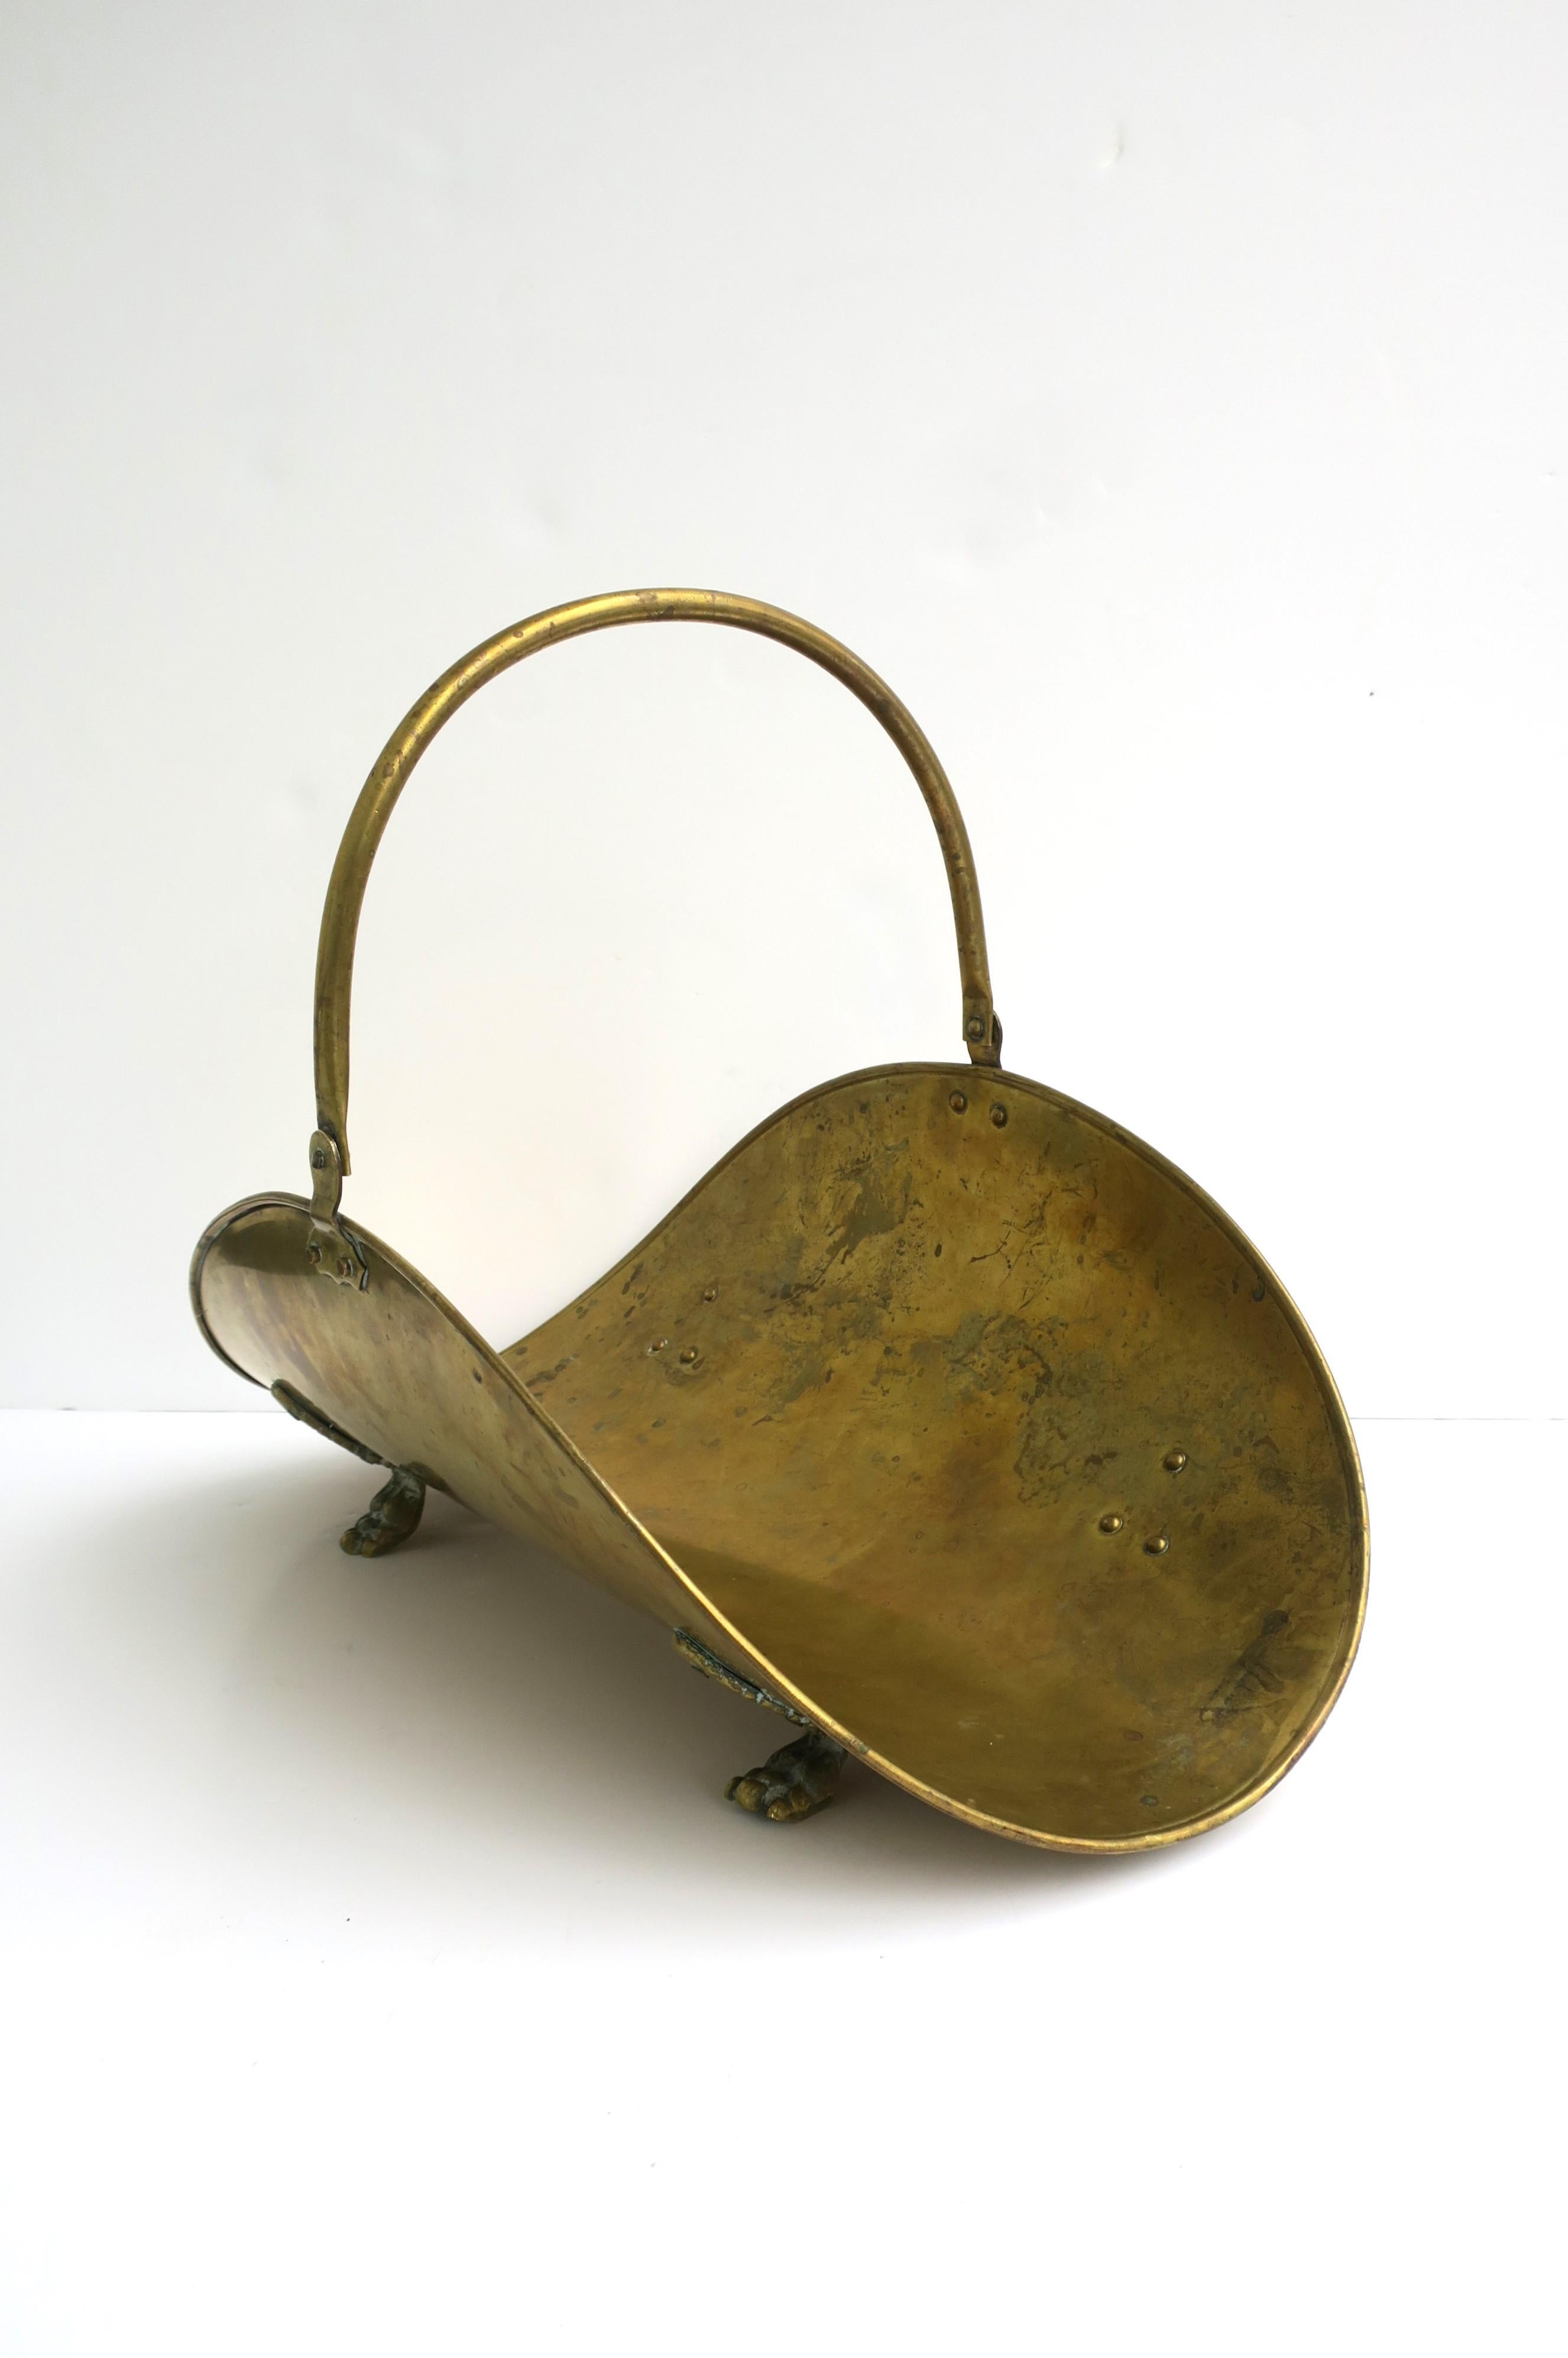 A brass firewood log holder with paw feet and adjustable handle, circa mid-20th century. Dimensions: 21